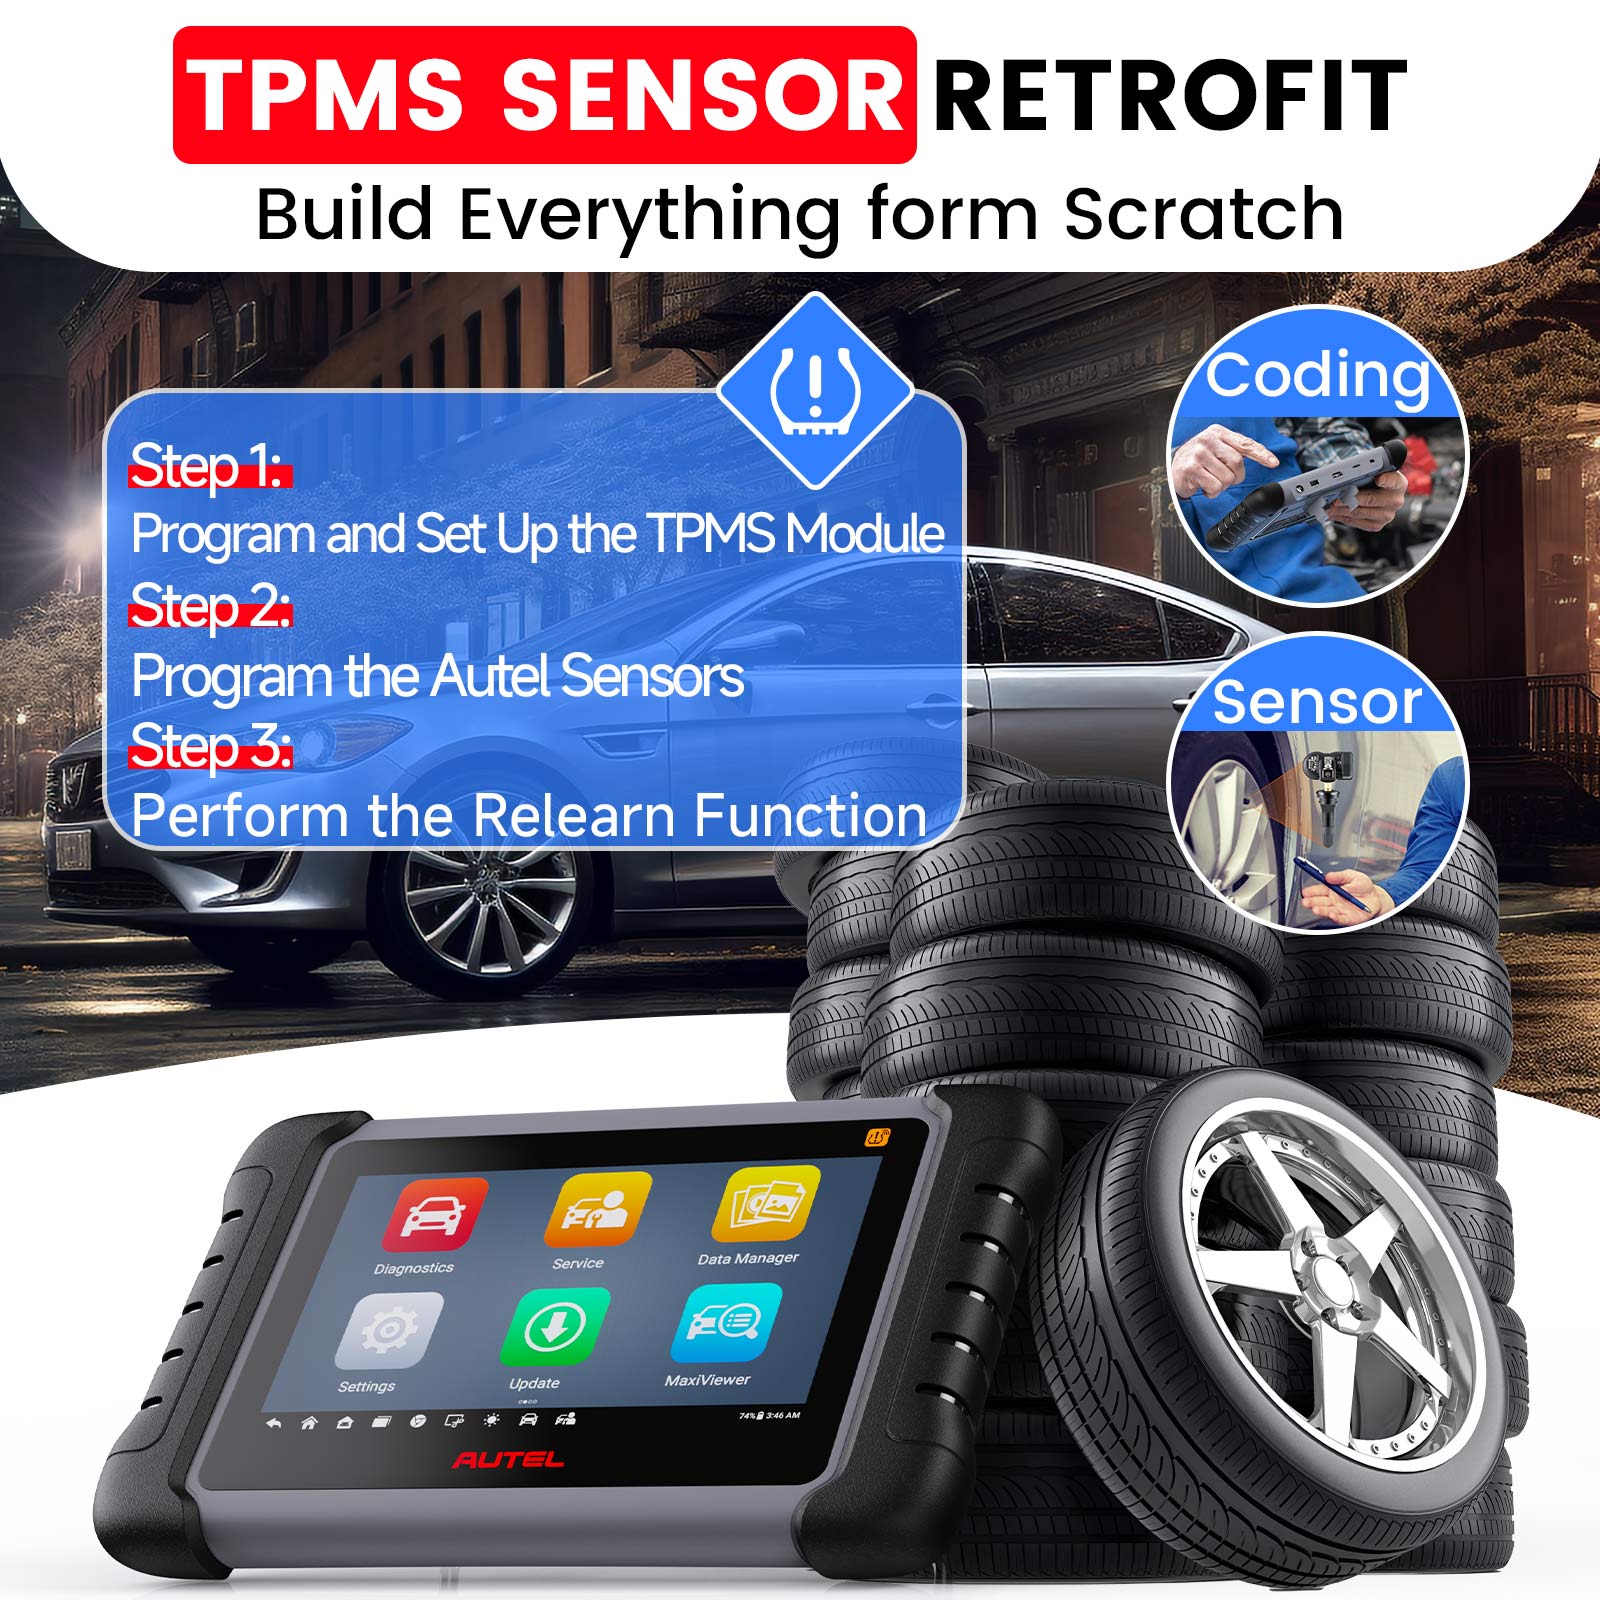 TPMS Functions